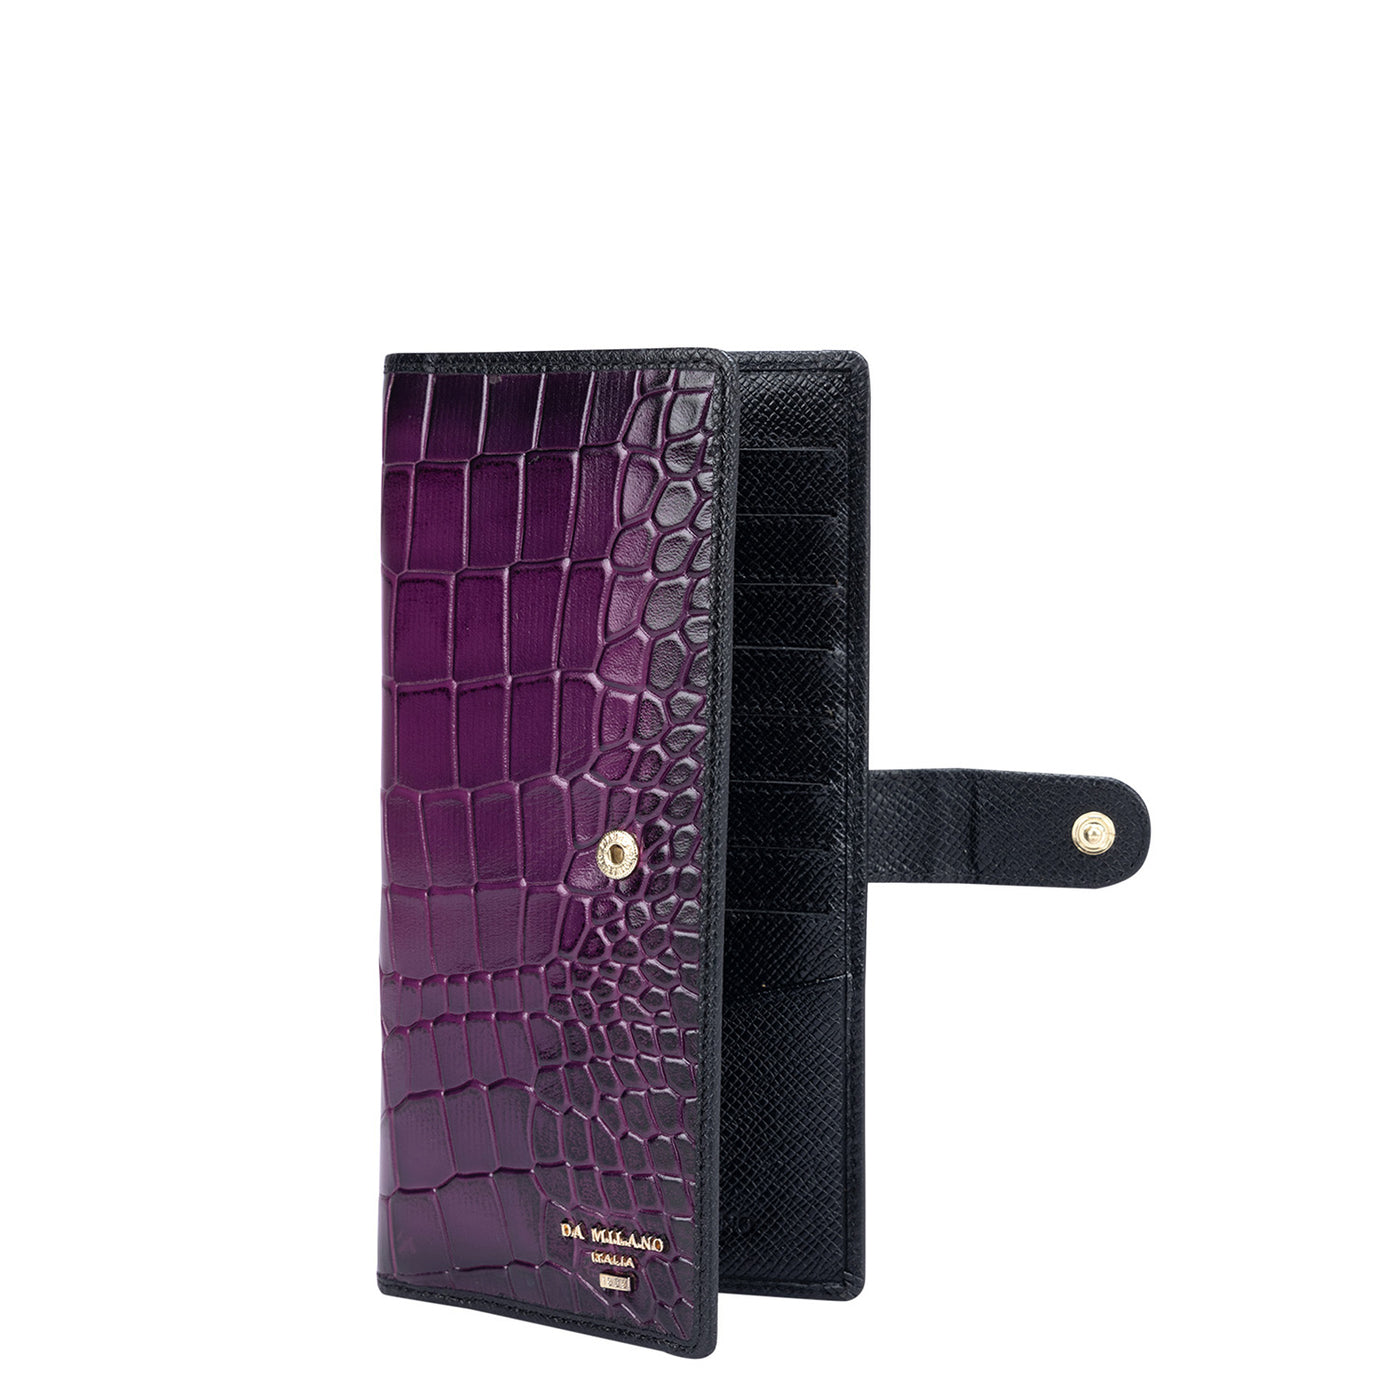 Croco Leather Card Case - Orchid